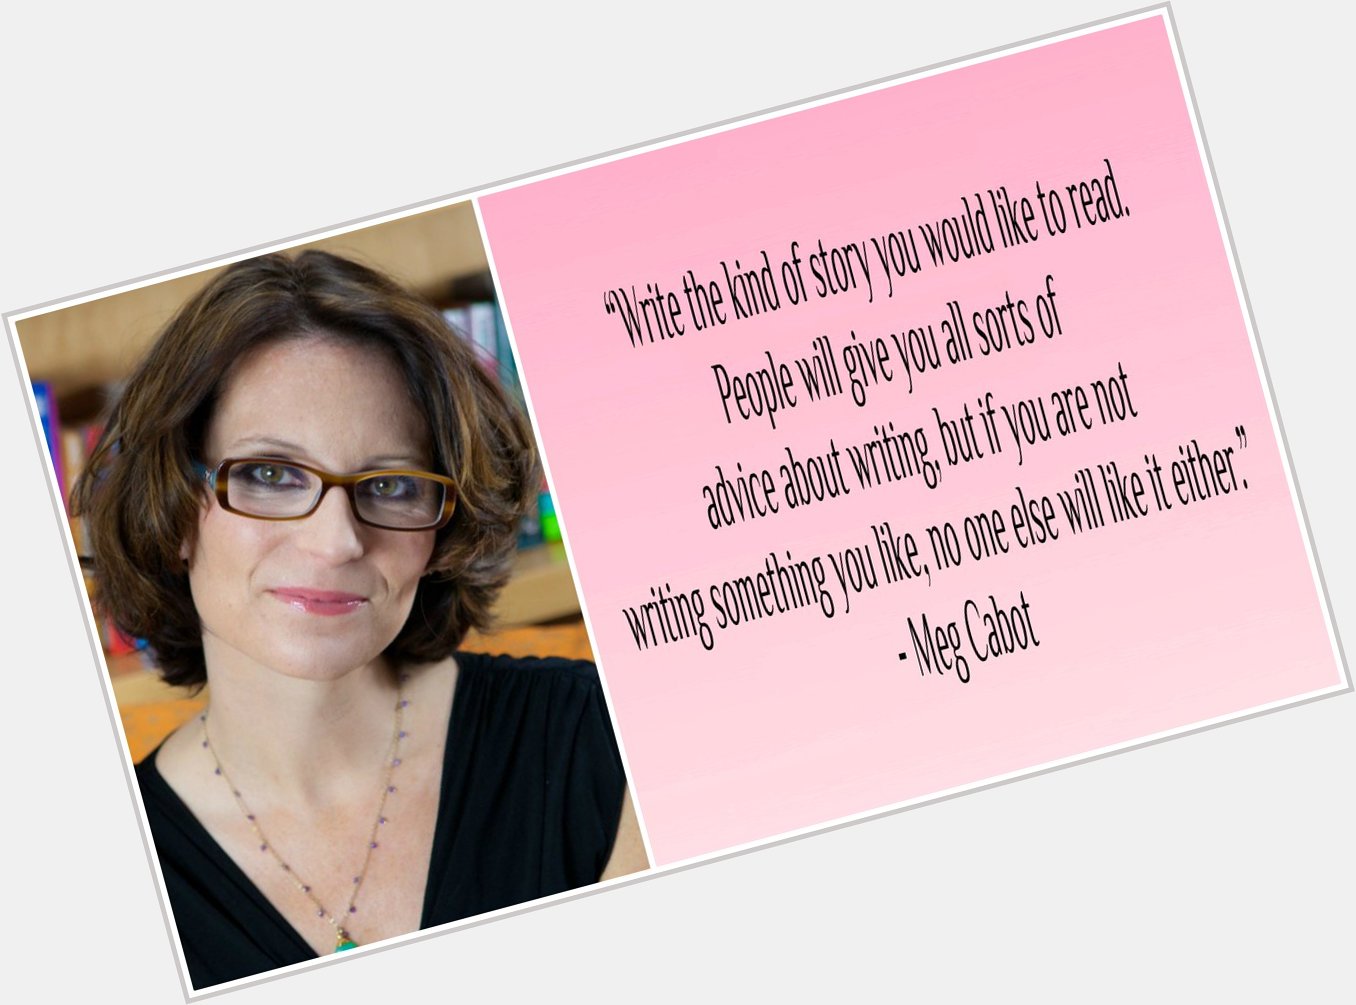 Happy Birthday to Meg Cabot, who is the author of many popular teen and romantic novels. 